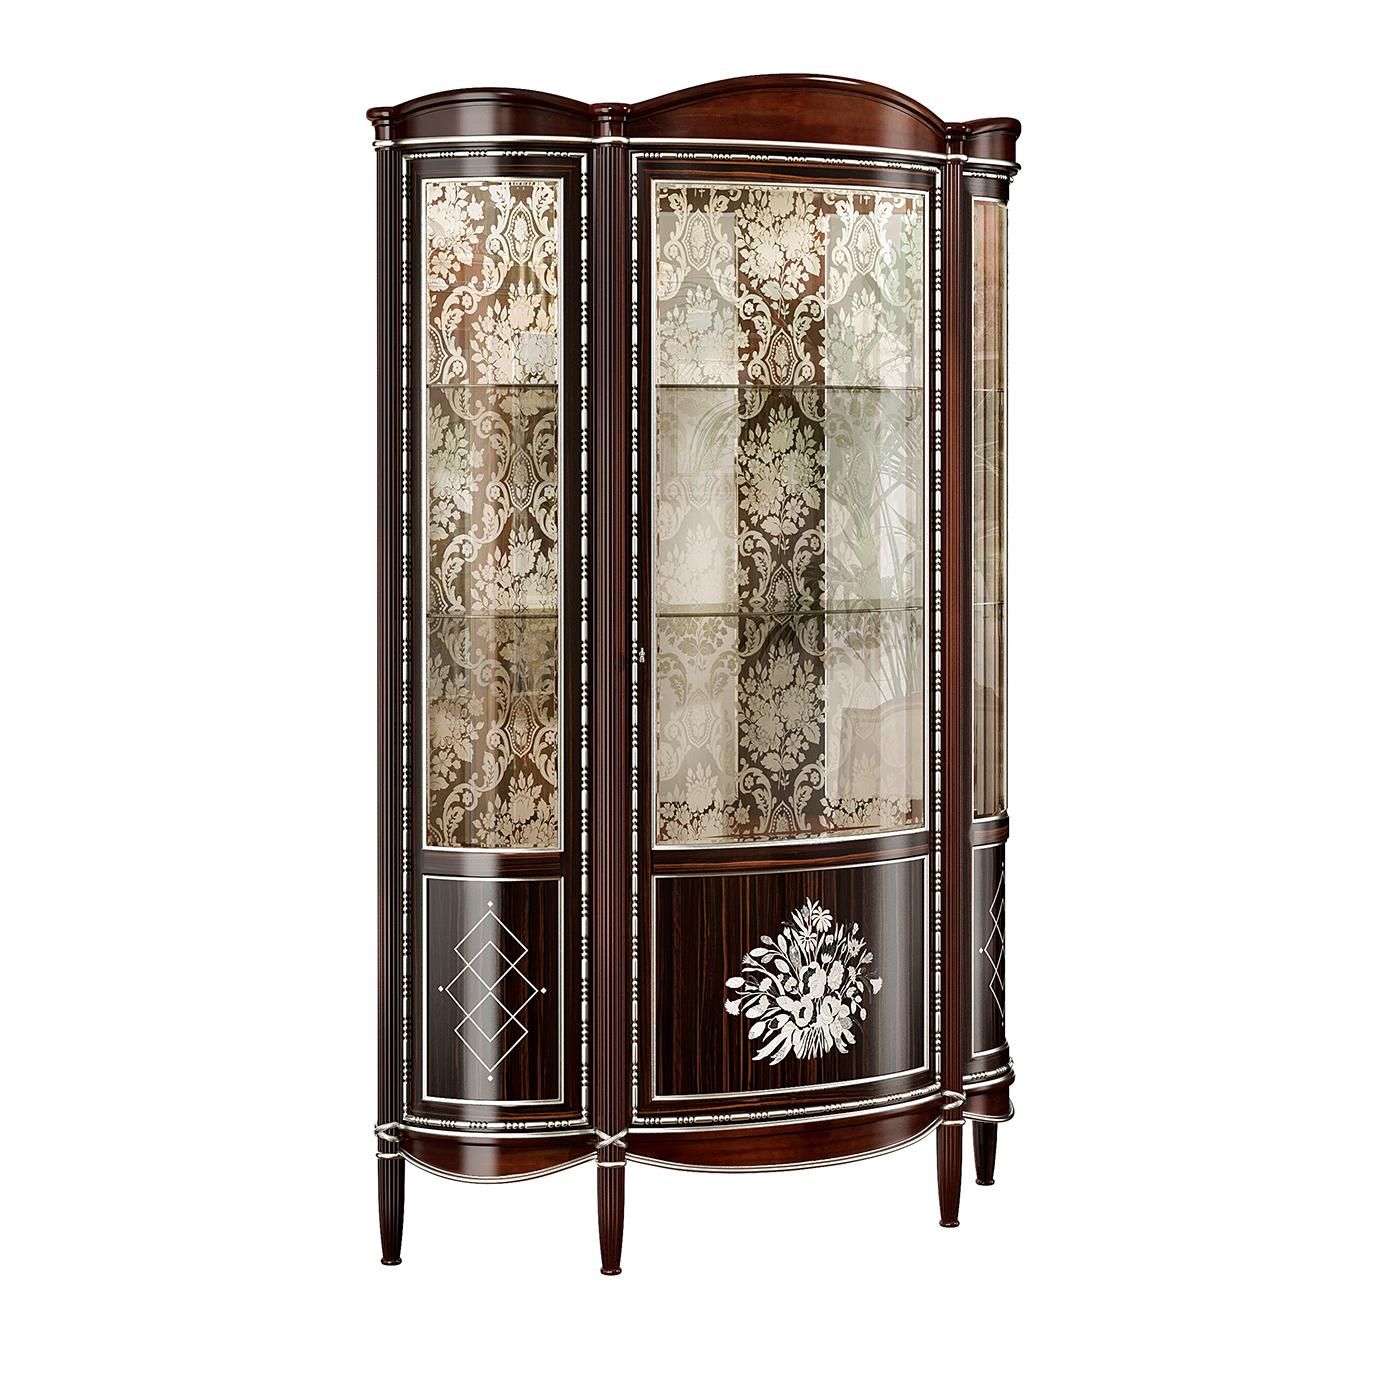 An impeccable combination of exclusive, refined materials, this display cabinet boasts a superbly plush allure in its Art Deco design. Crafted of Makassar ebony, the top part of the doors is made of glass, while the bottom one boasts an inlay work